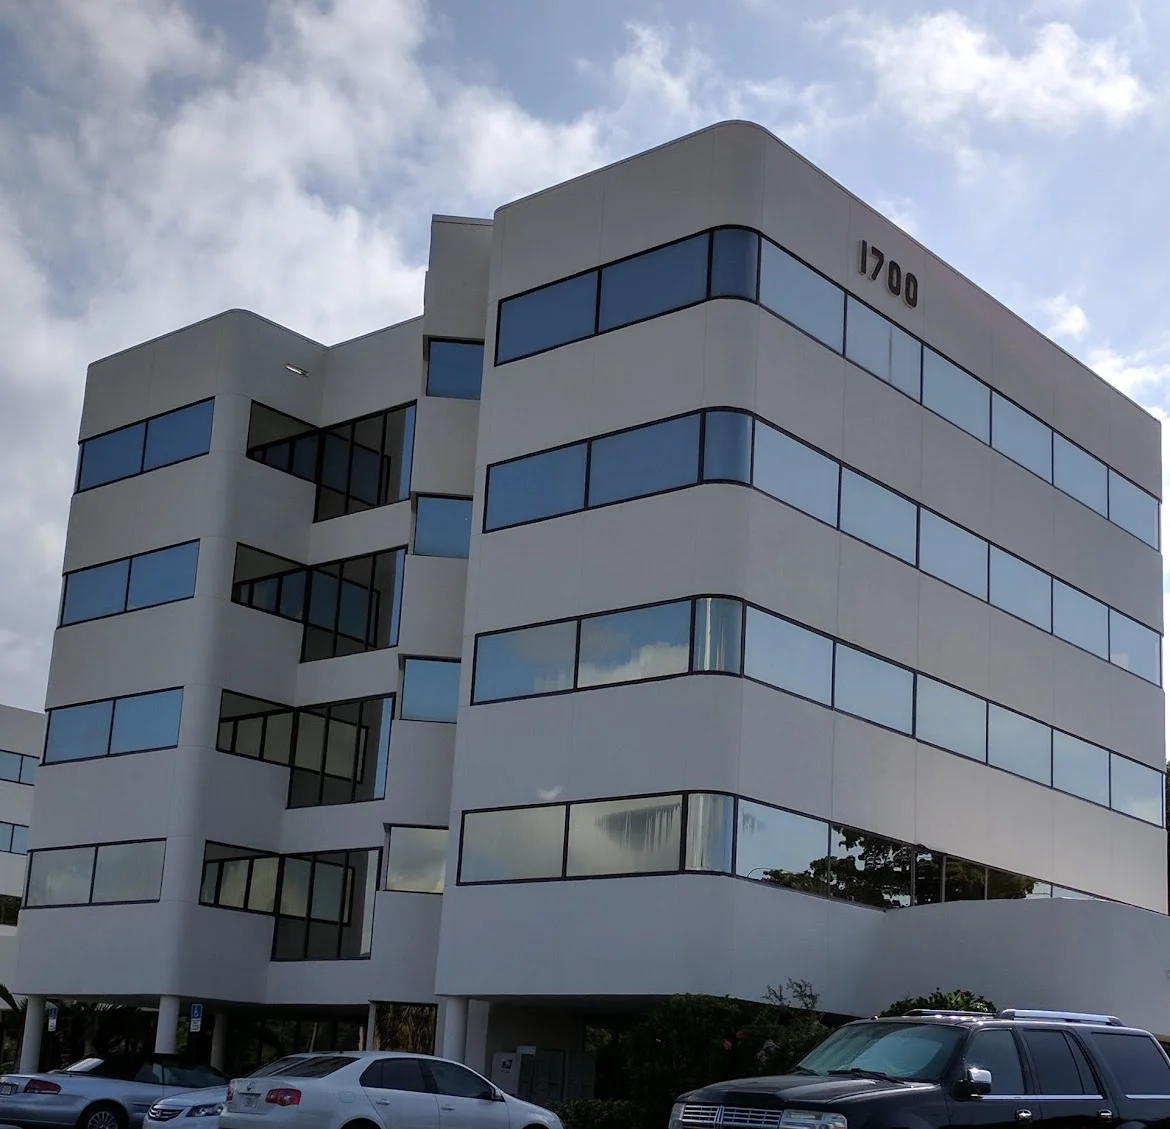 The exterior of Mustang Funding's Florida office